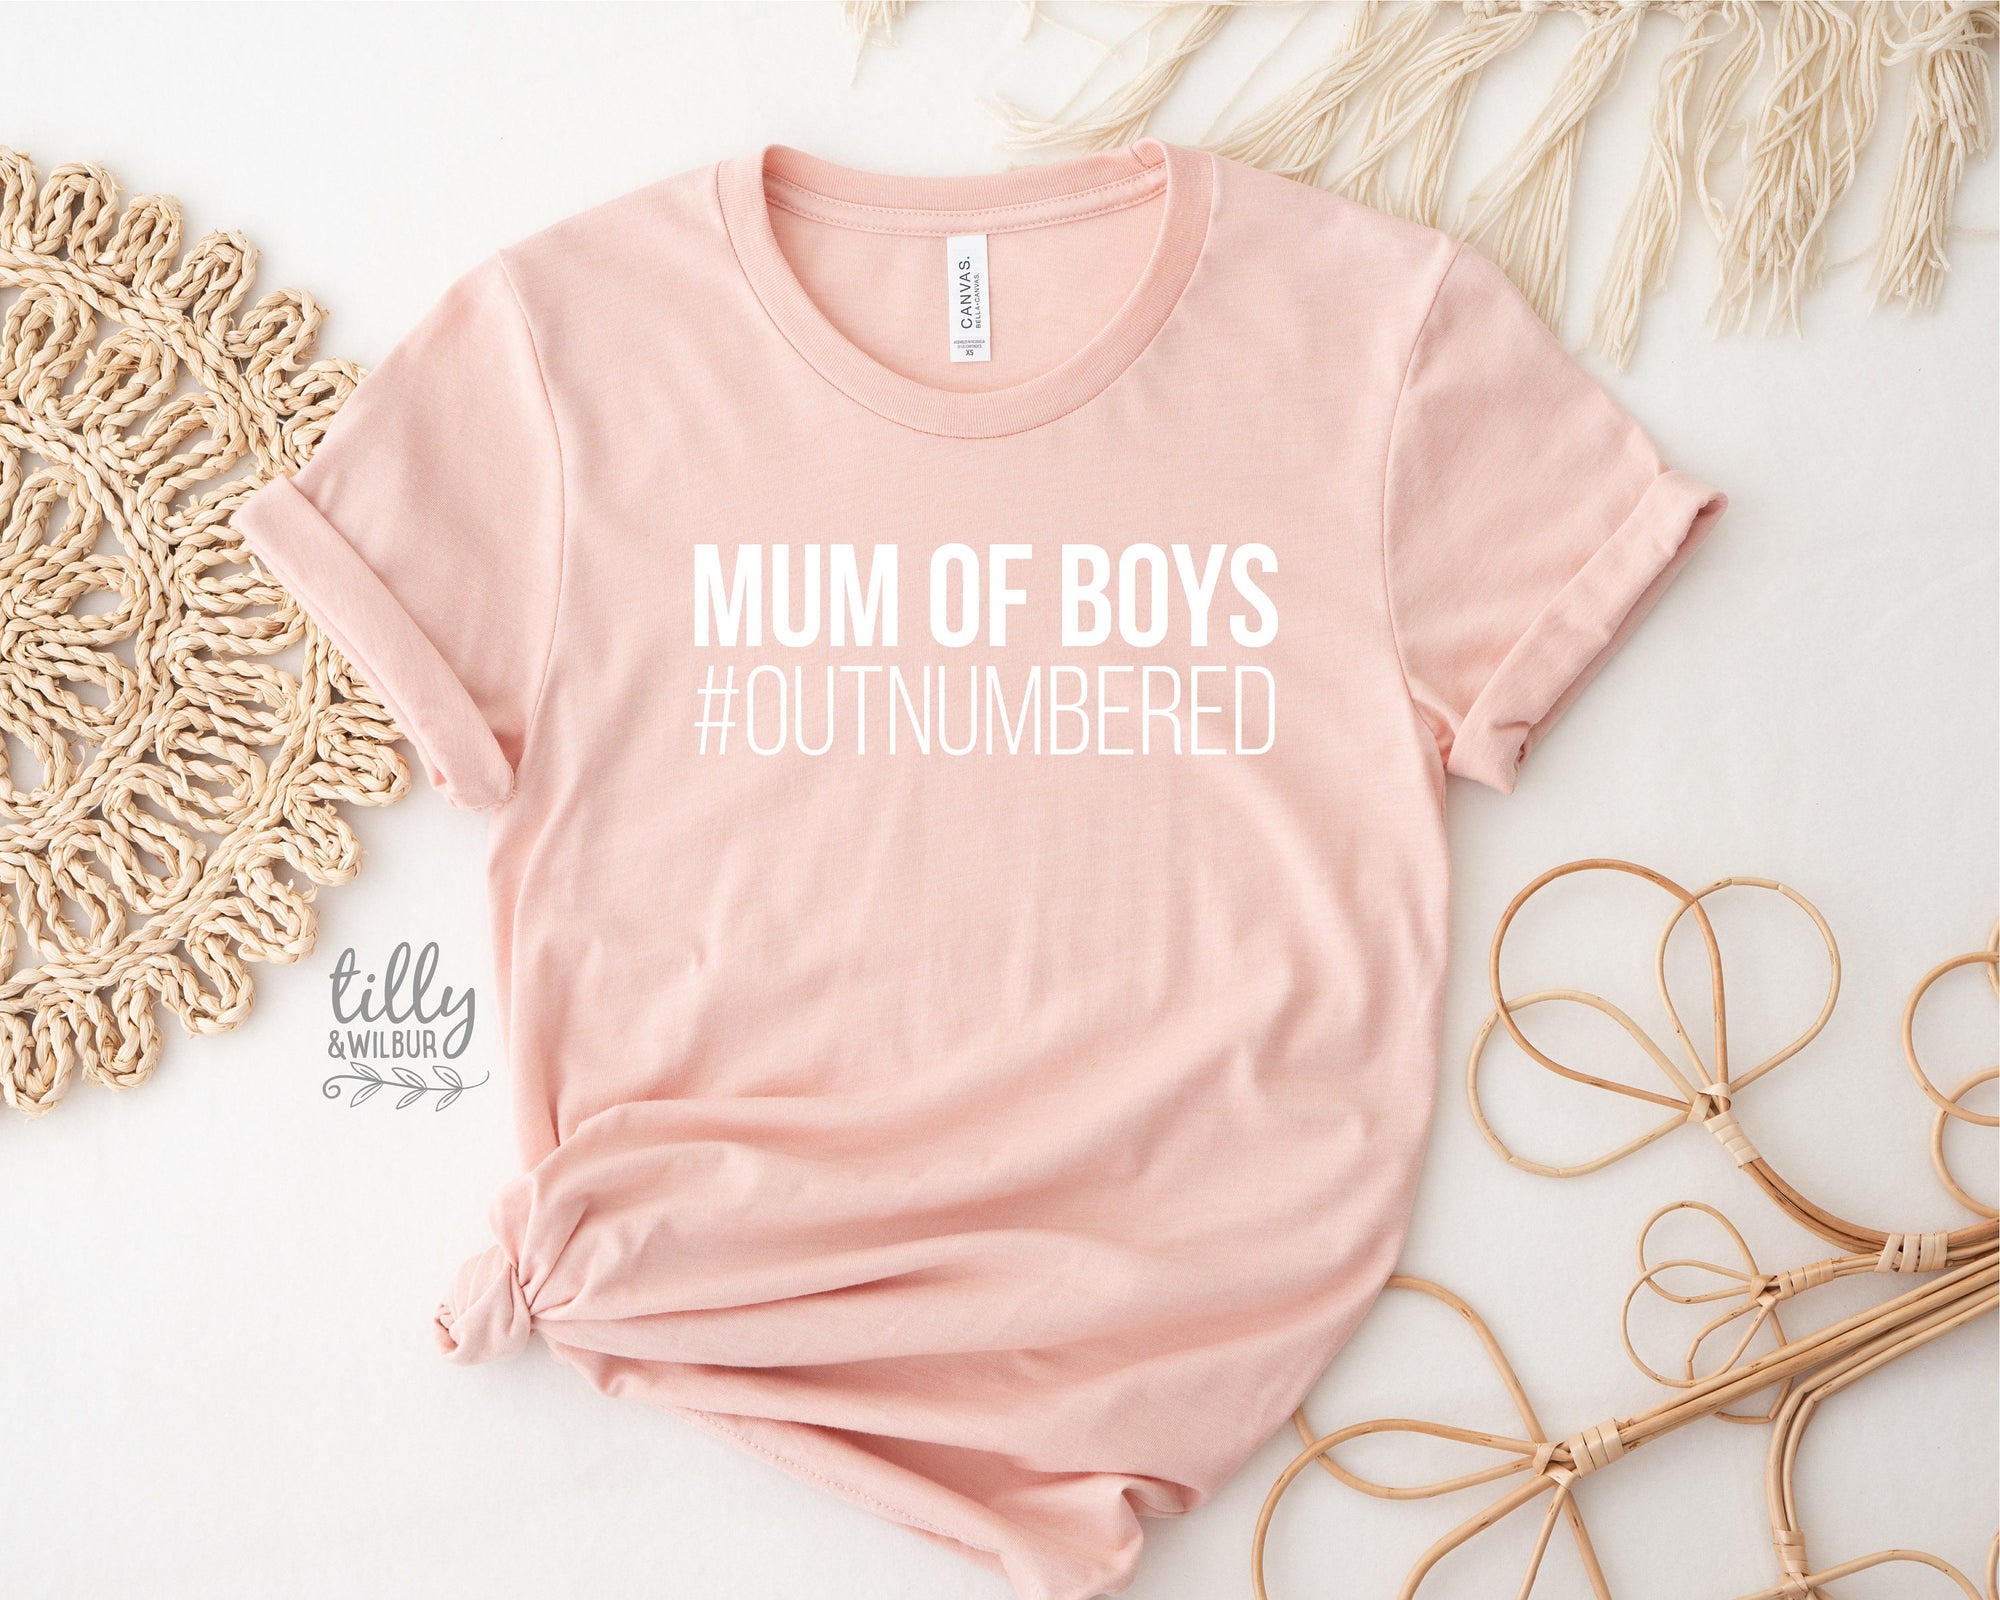 Mum Of Boys #Outnumbered T-Shirt, Mother's Day T-Shirt, Mother's Day Gift, Mum Of Songs, Mum Gift, Mum T-Shirt, Funny Mum T-Shirt, Mom Of